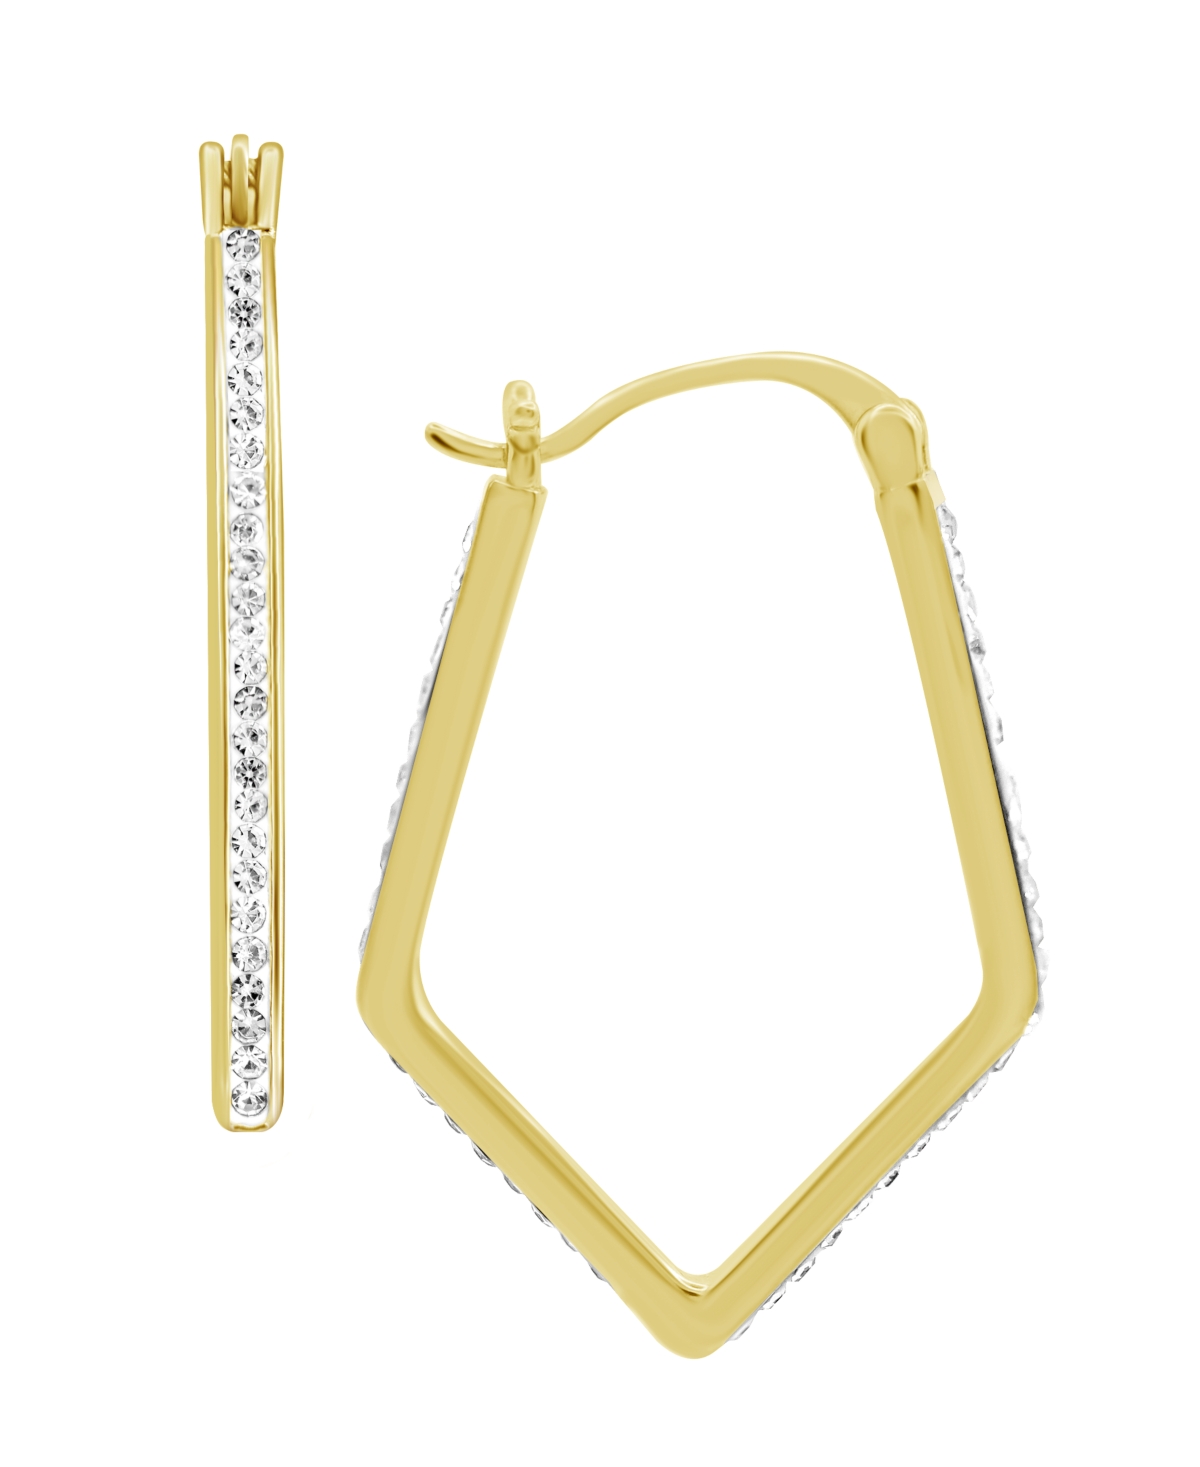 Clear Crystal Pave Geometric Hoop Earring, Gold Plate and Silver Plate - Gold-Tone